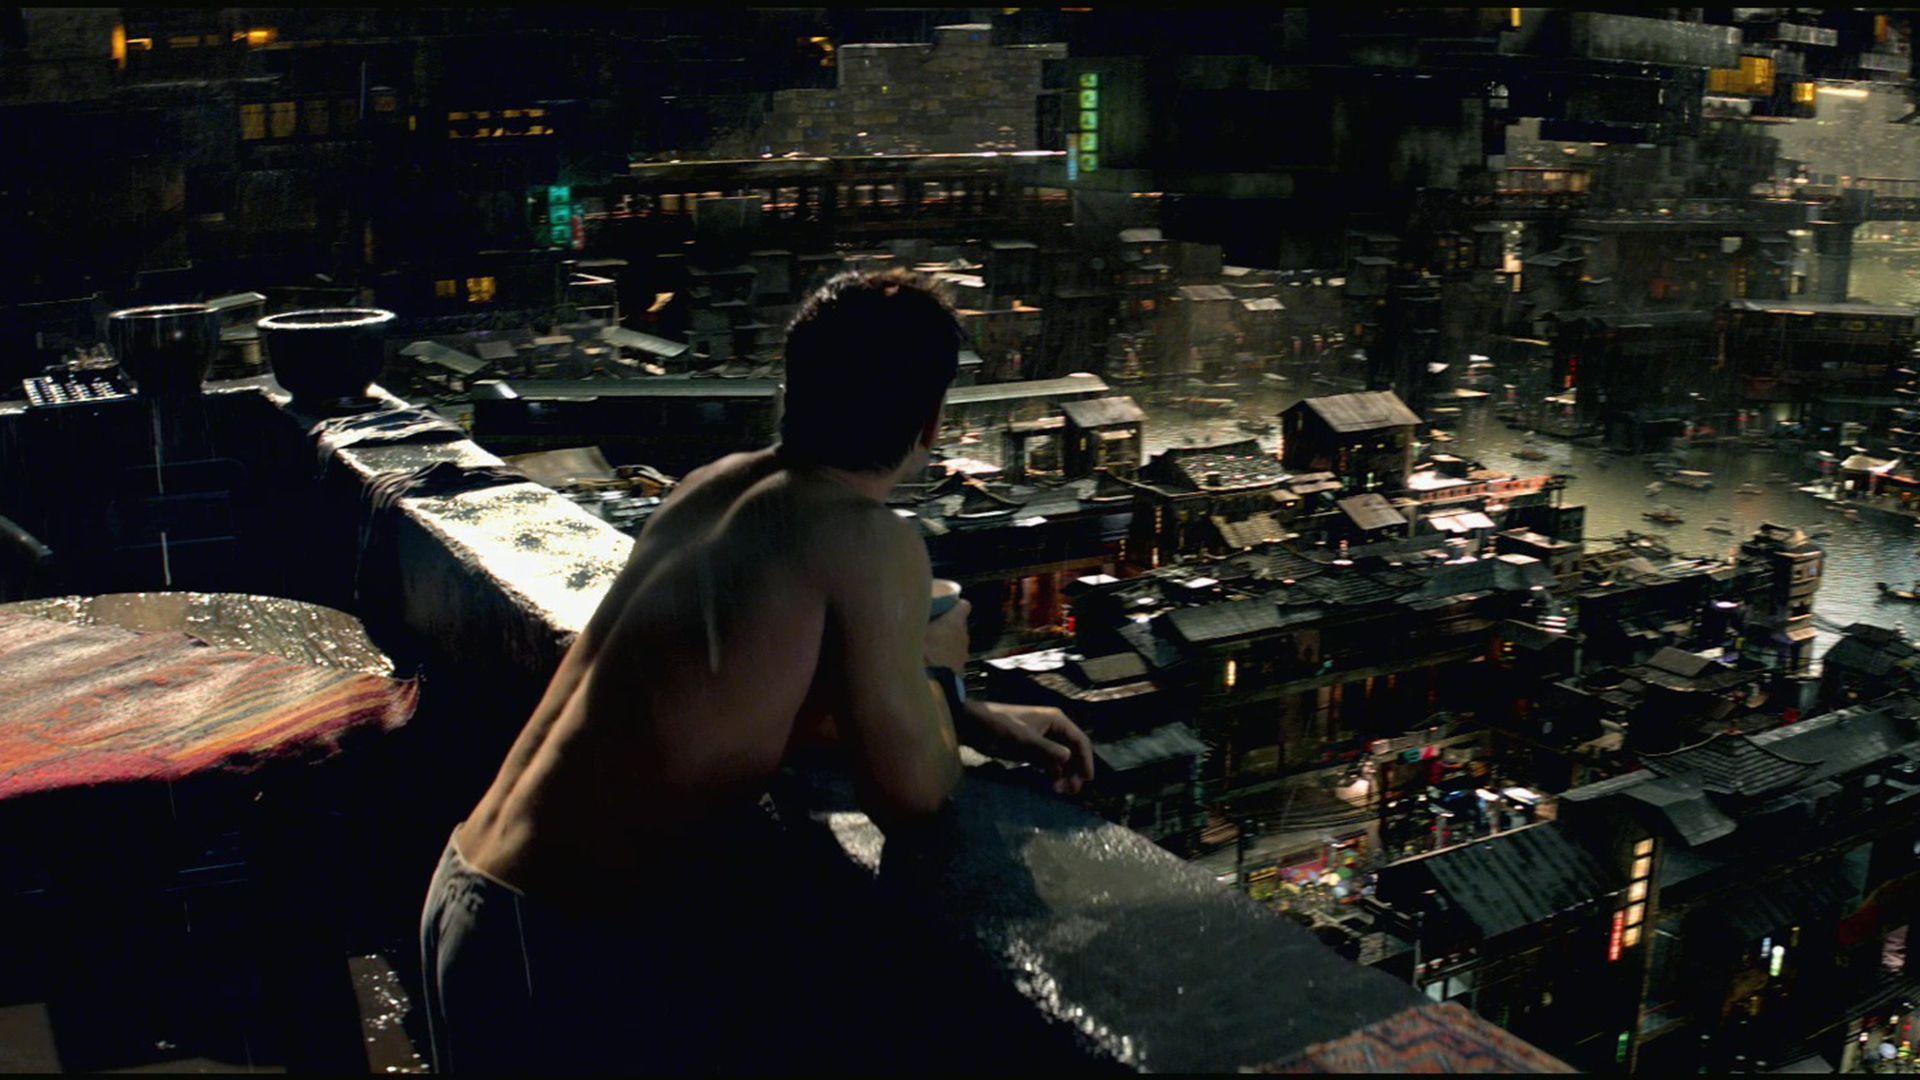 Total Recall City View Image & Picture